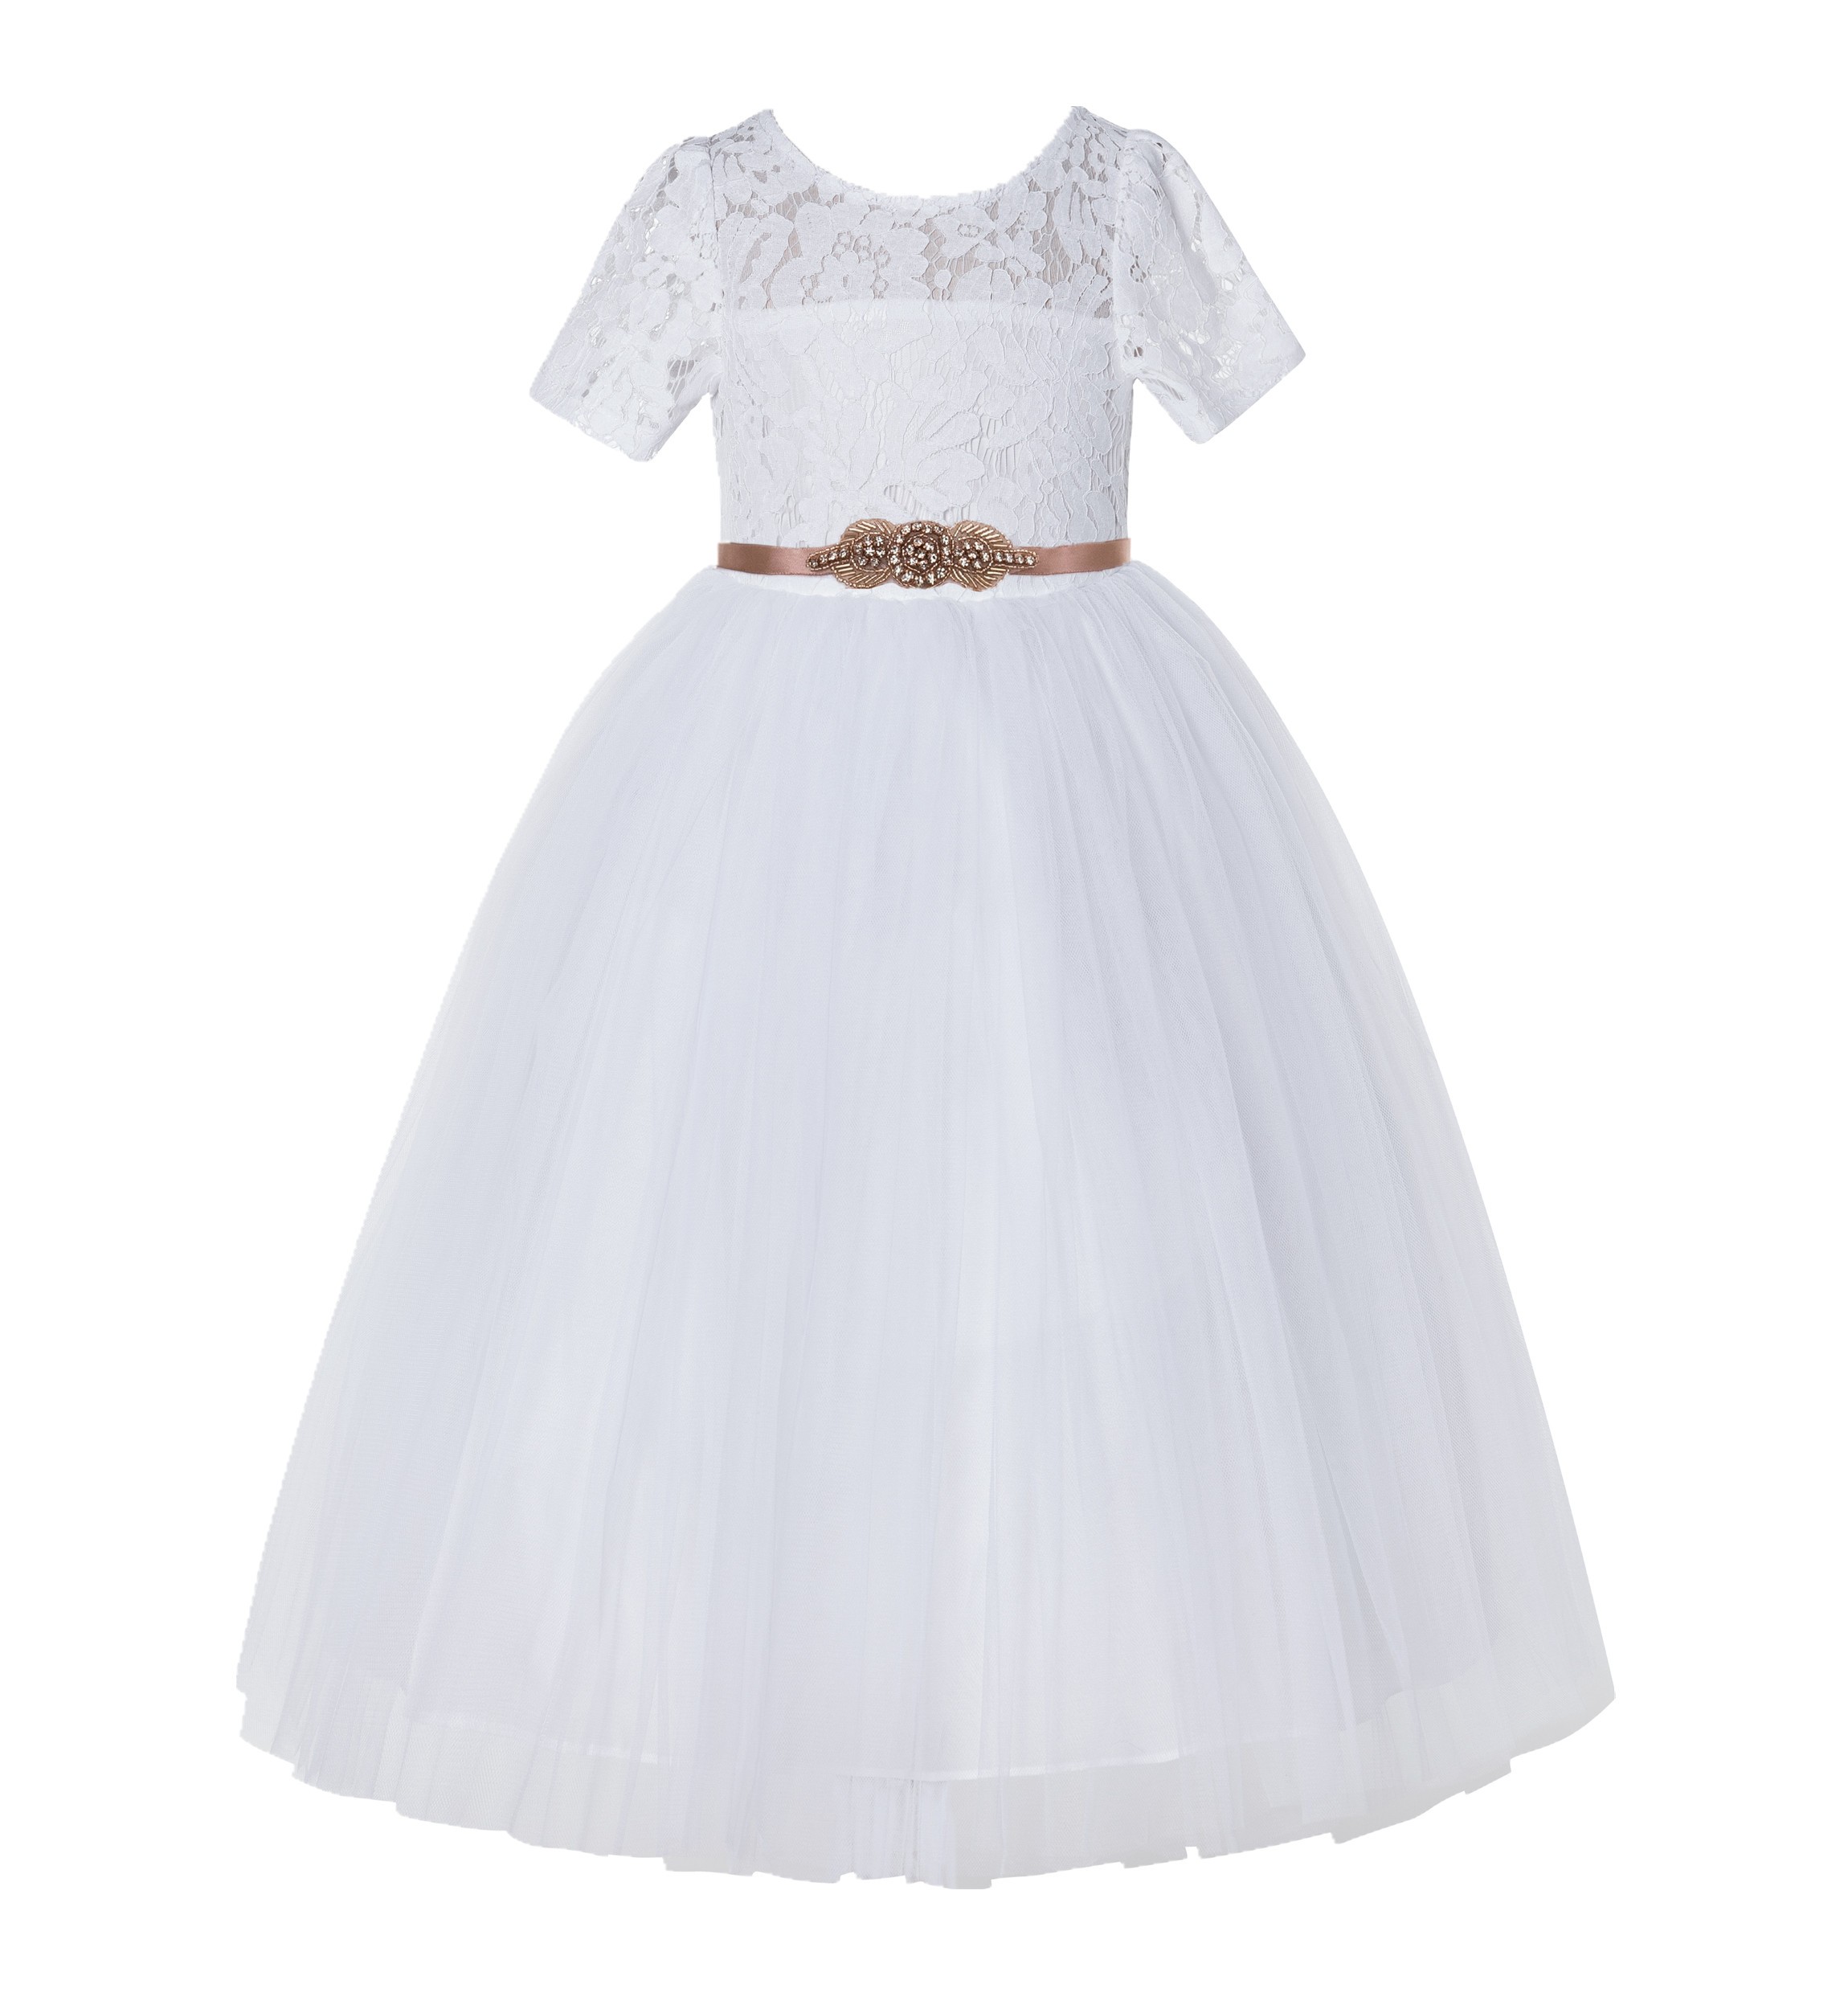 White / Rose Gold Floral Lace Flower Girl Dress Pageant Dress LG2